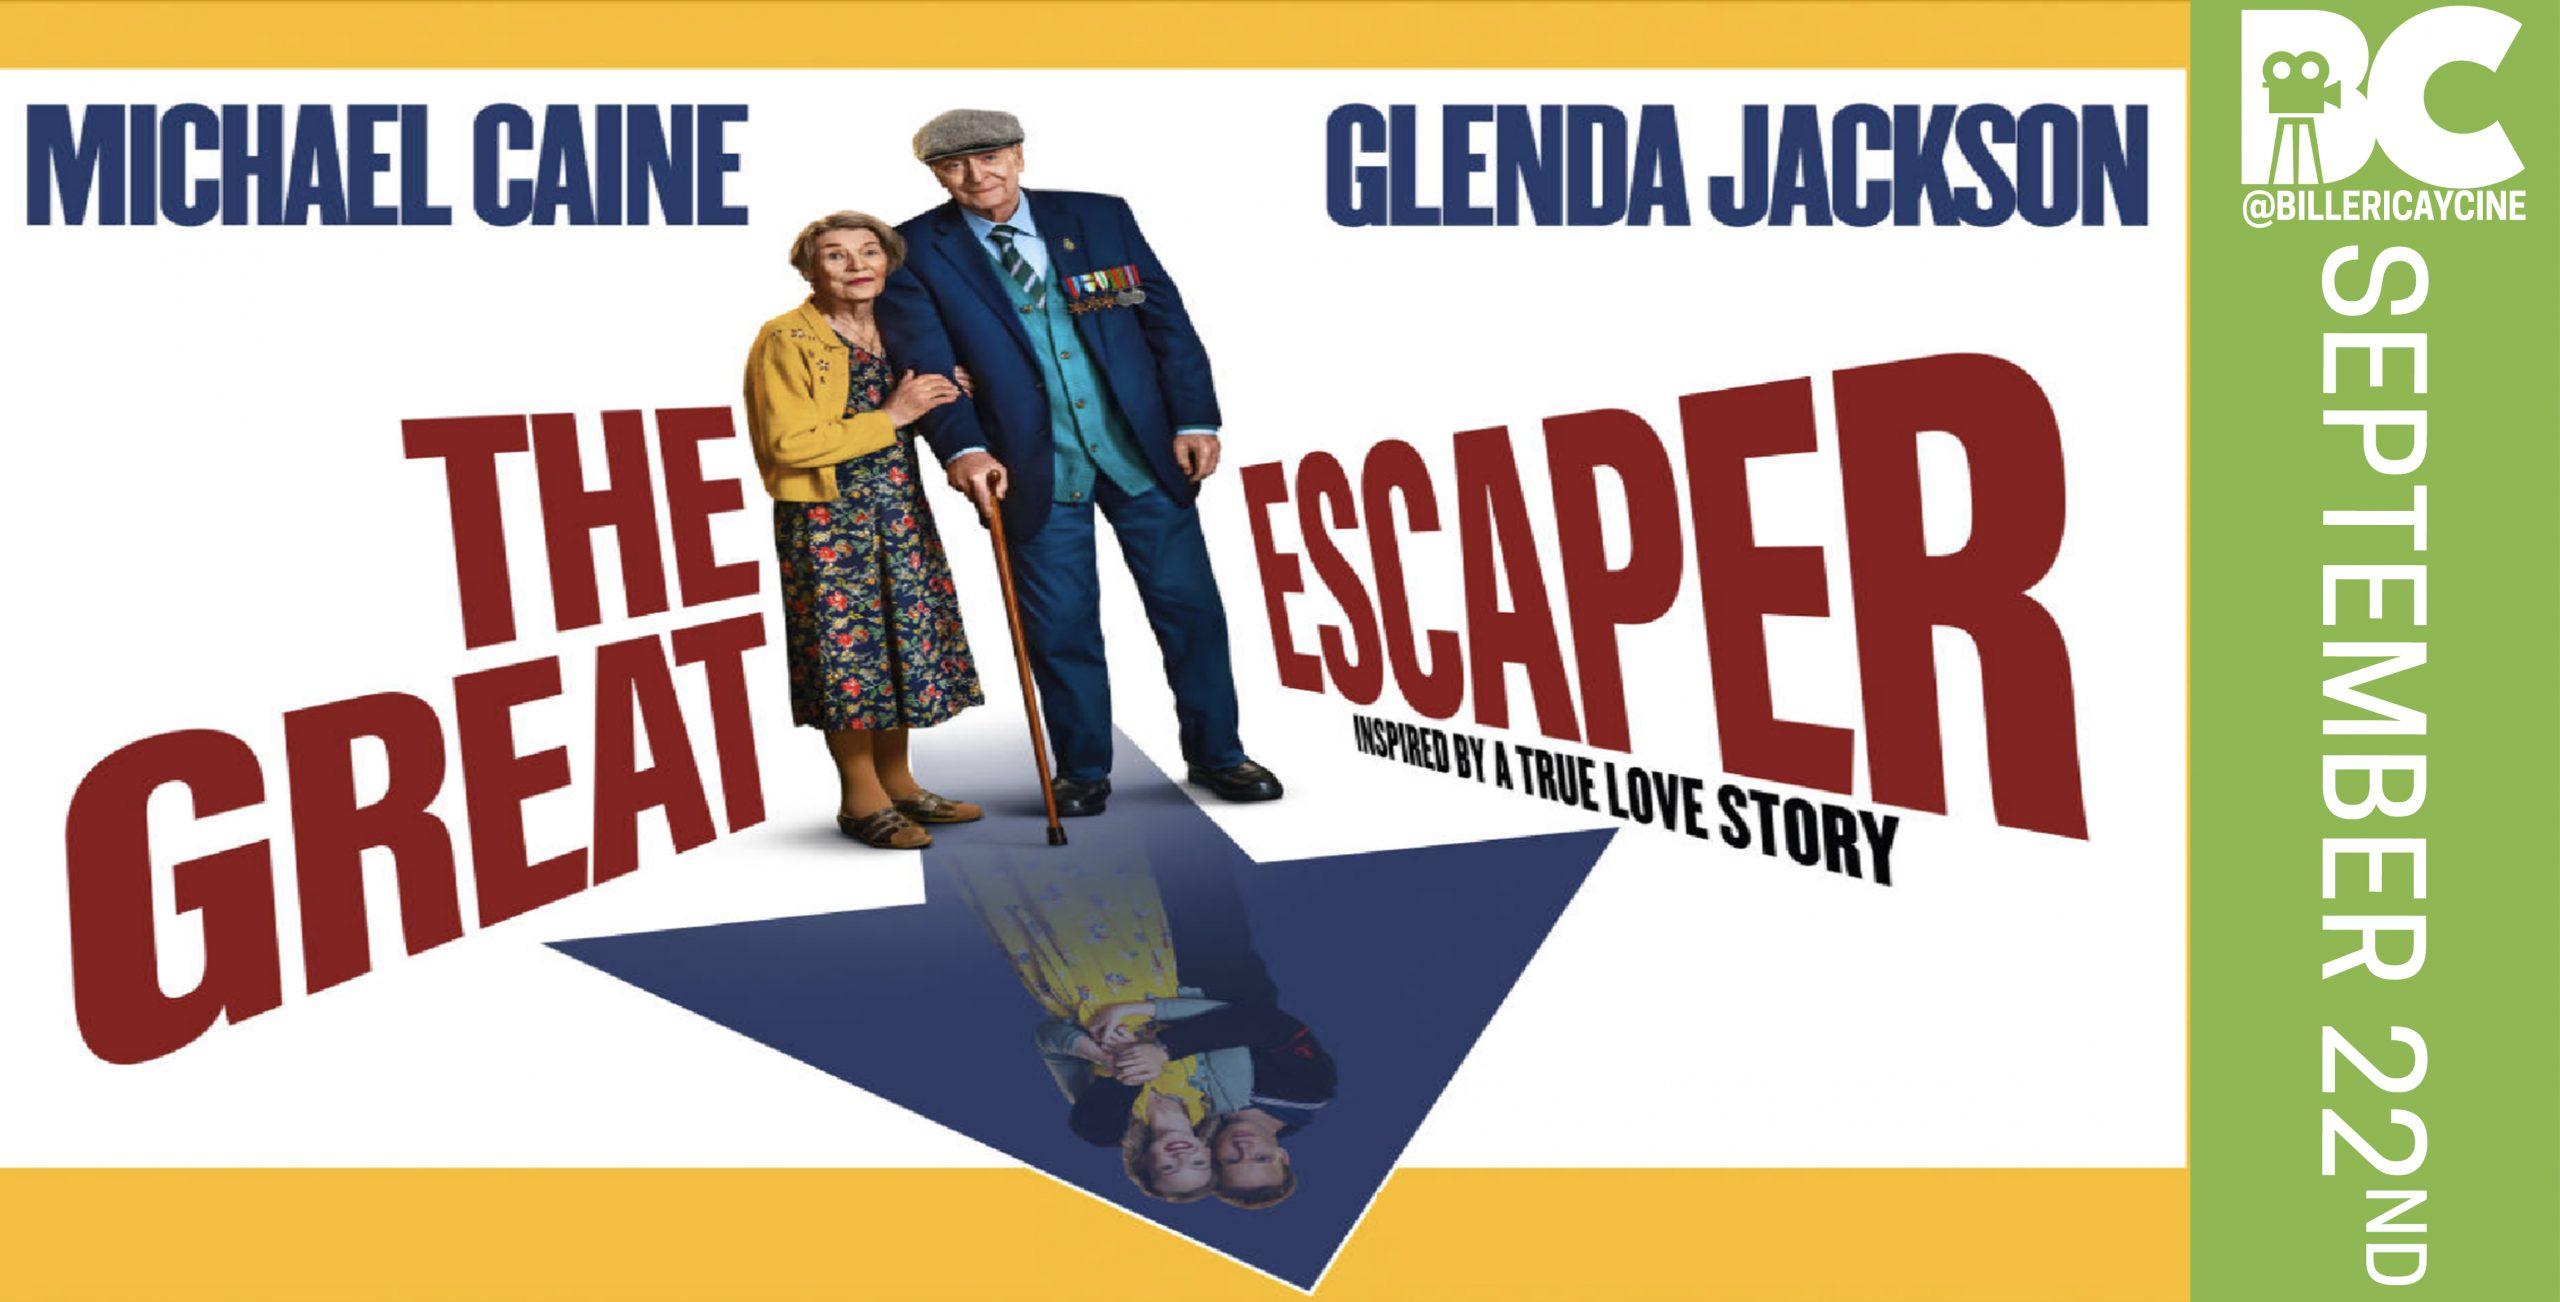 Sunday Matinee: The Great Escaper